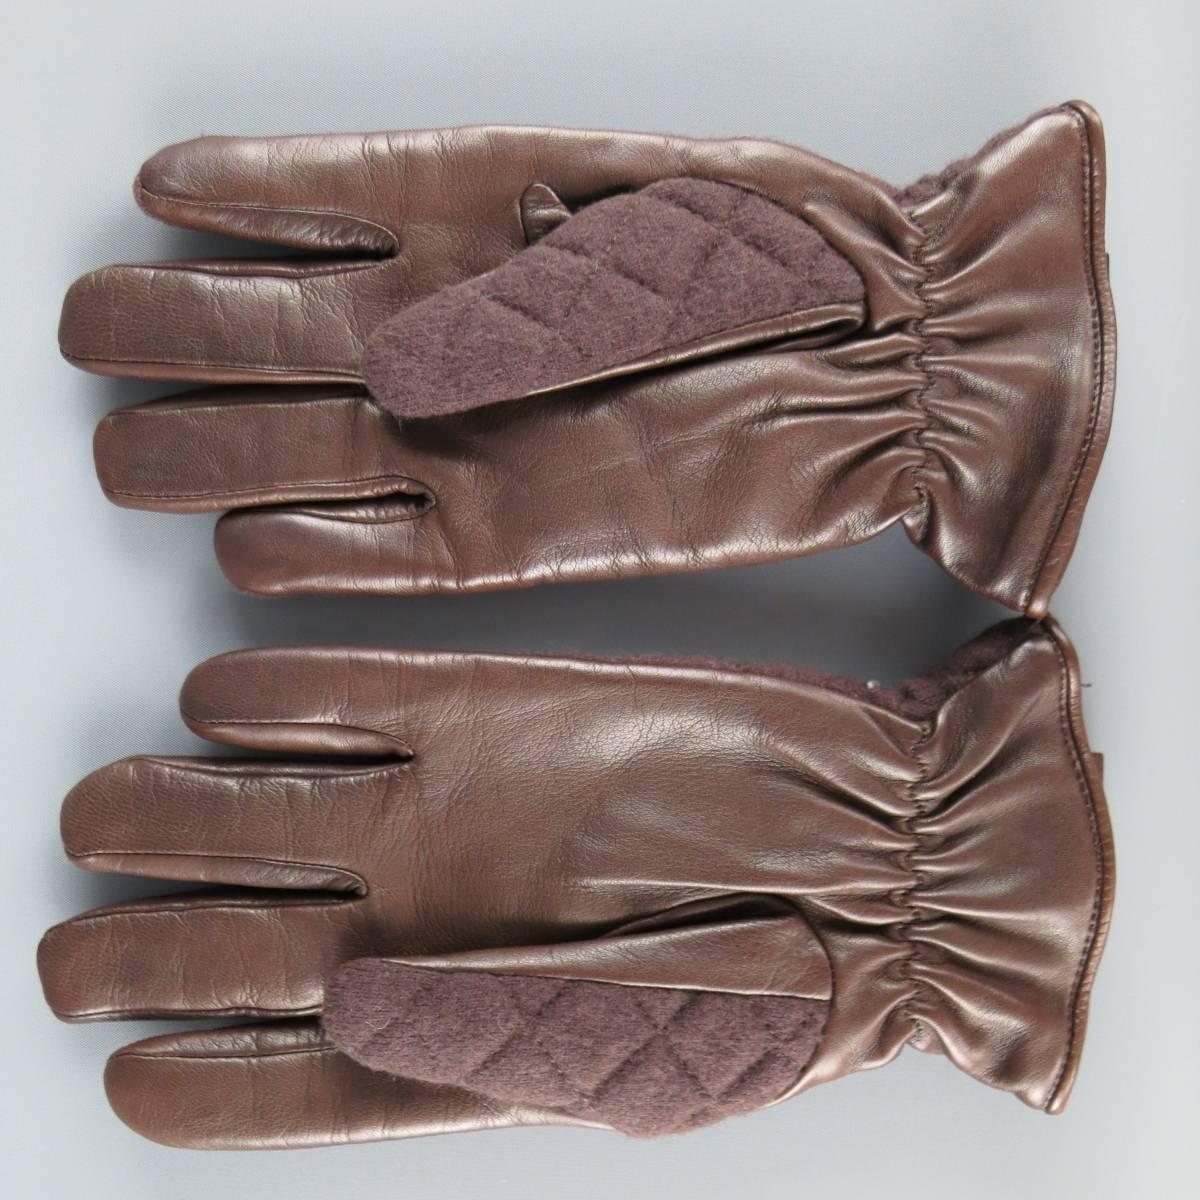 ARMANI COLLEZIONI winter gloves come in a quilted brown wool blend fabric with a lambskin leather palm, elastic cinched wrist, and leather embossed tag. Made in Italy.
 
New with Tags.
 
Length: 9.5 in.
Width: 4 in.

SKU: 84642